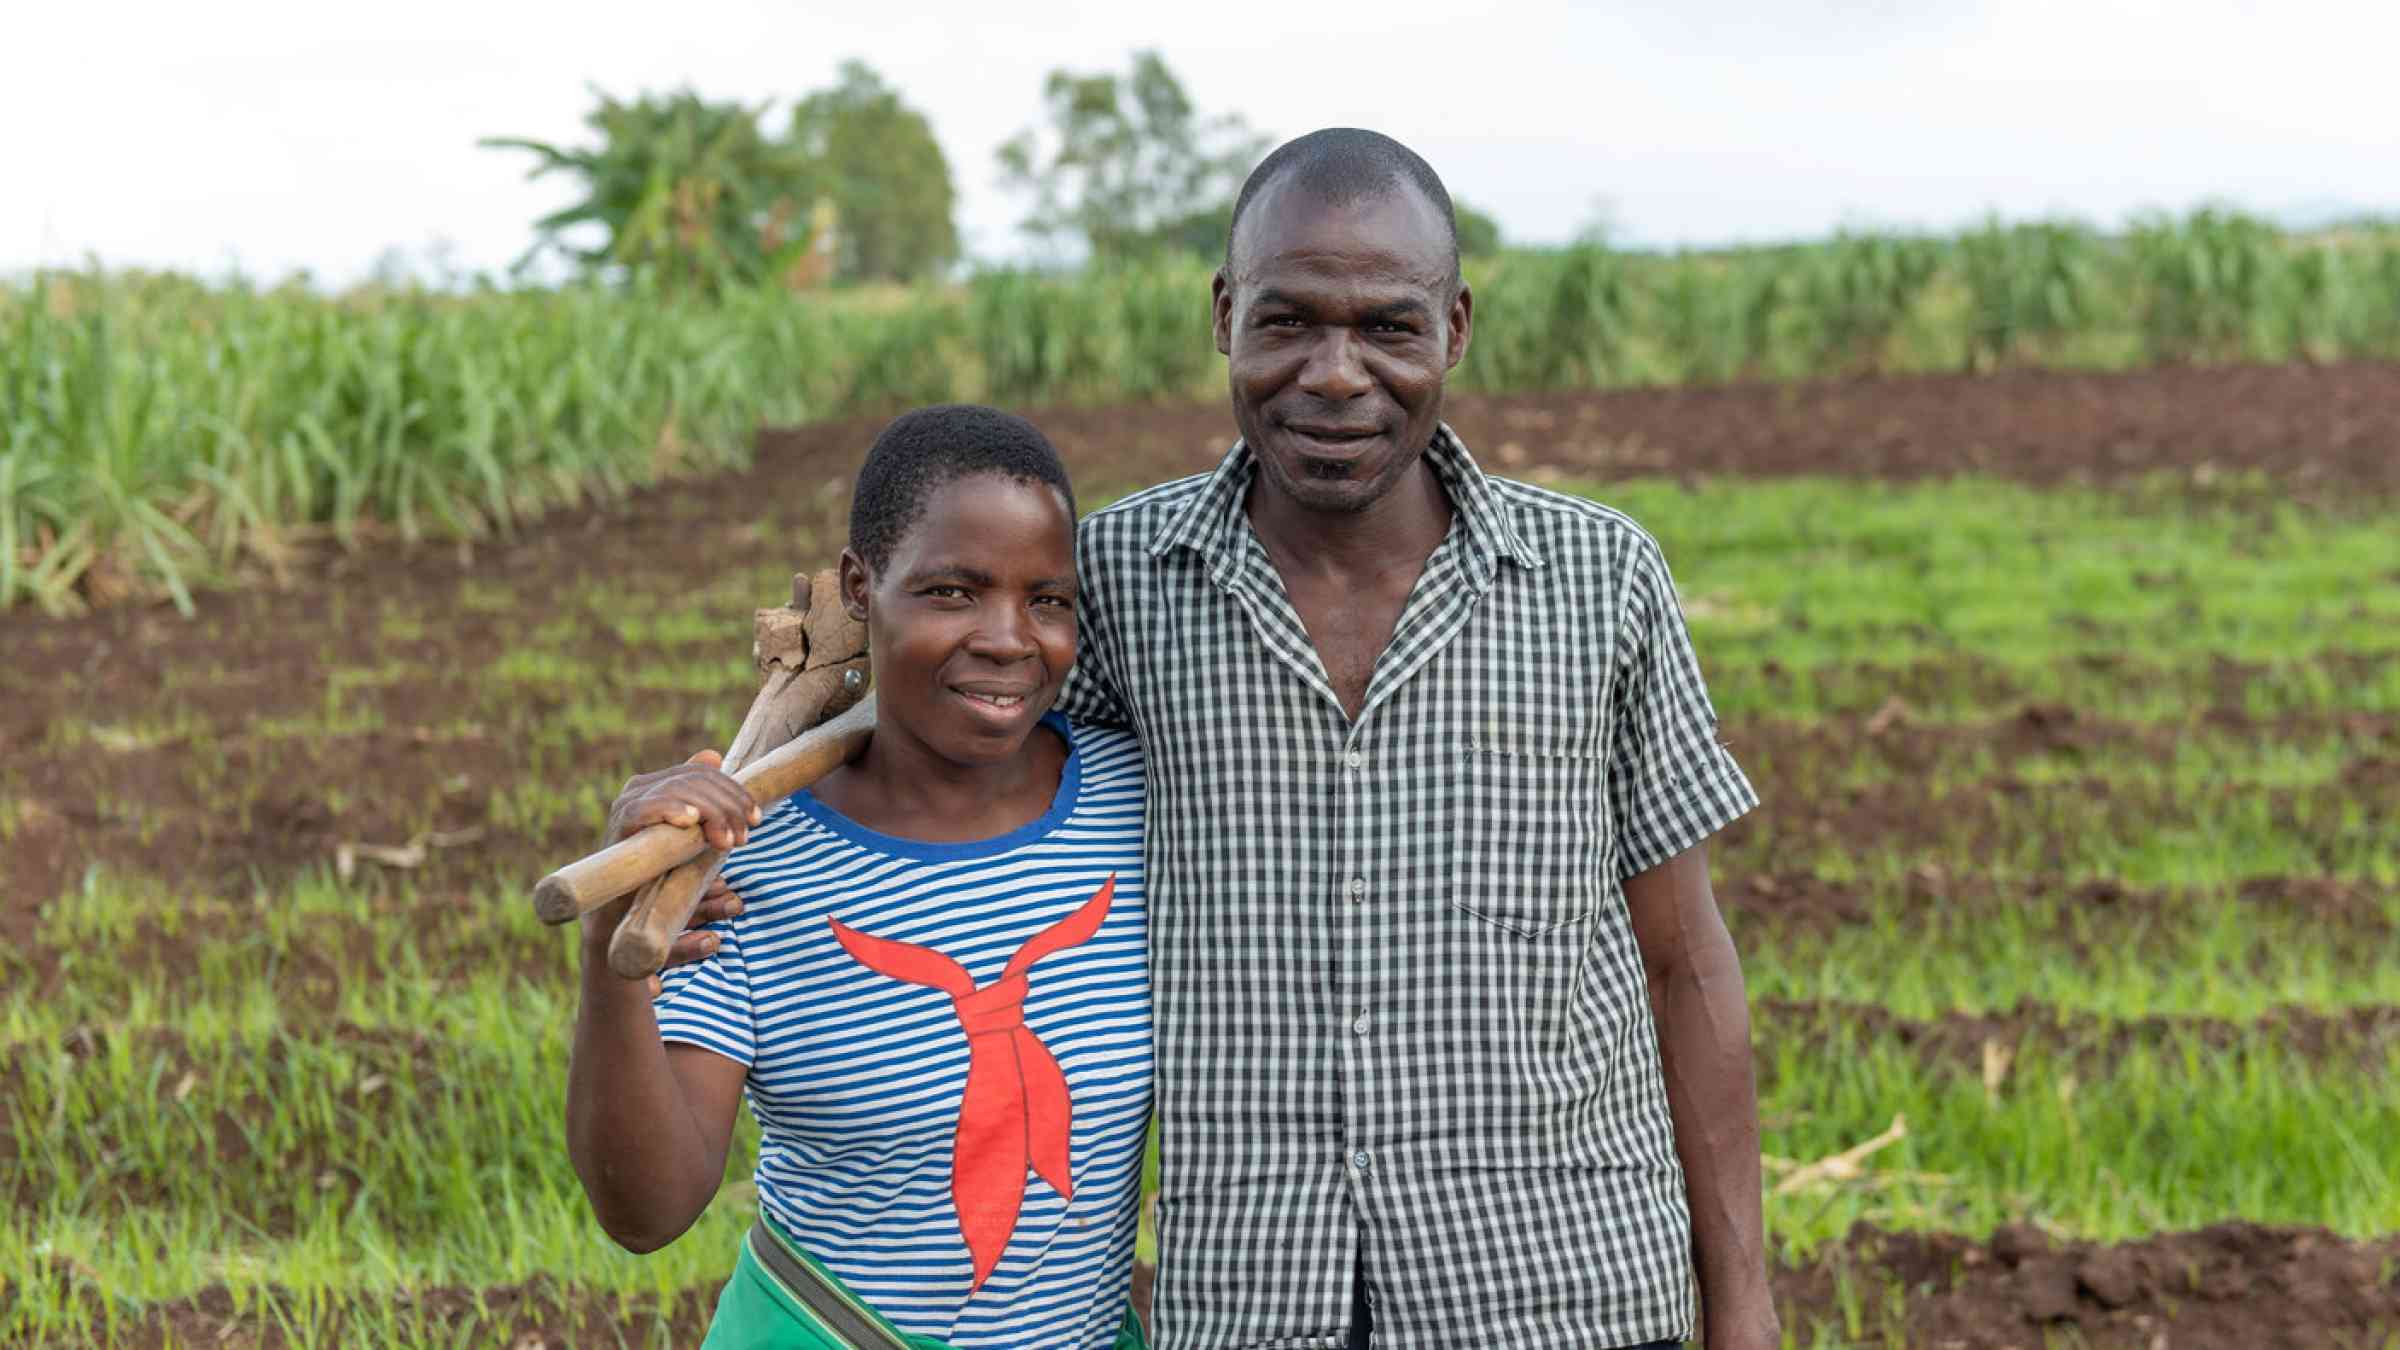 John Mphaya and his wife, Esinala Samuel Smiling to the camera while at their field